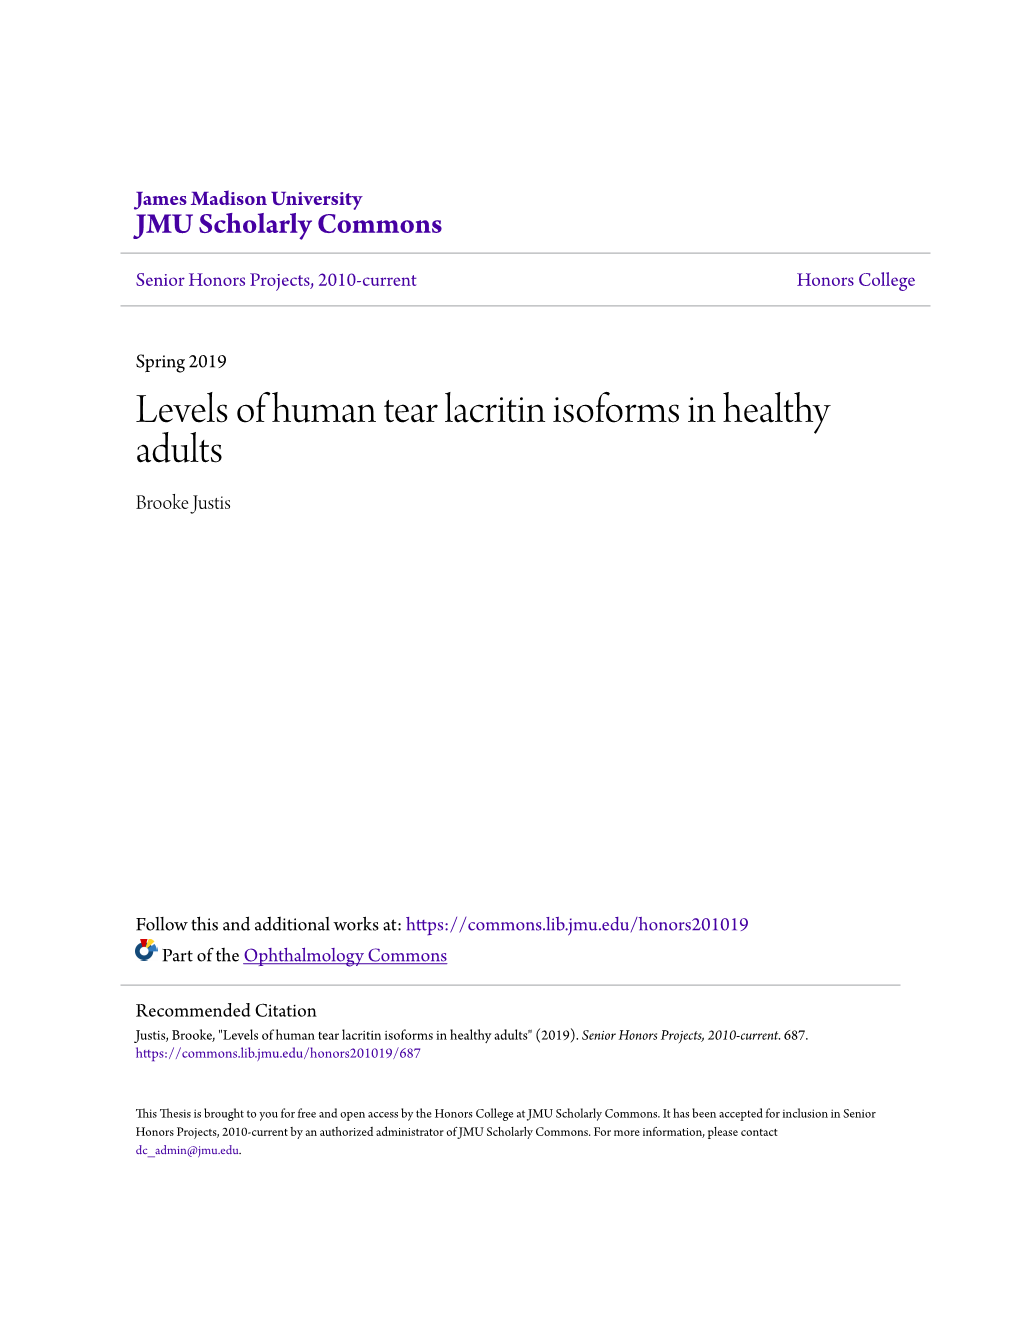 Levels of Human Tear Lacritin Isoforms in Healthy Adults Brooke Justis